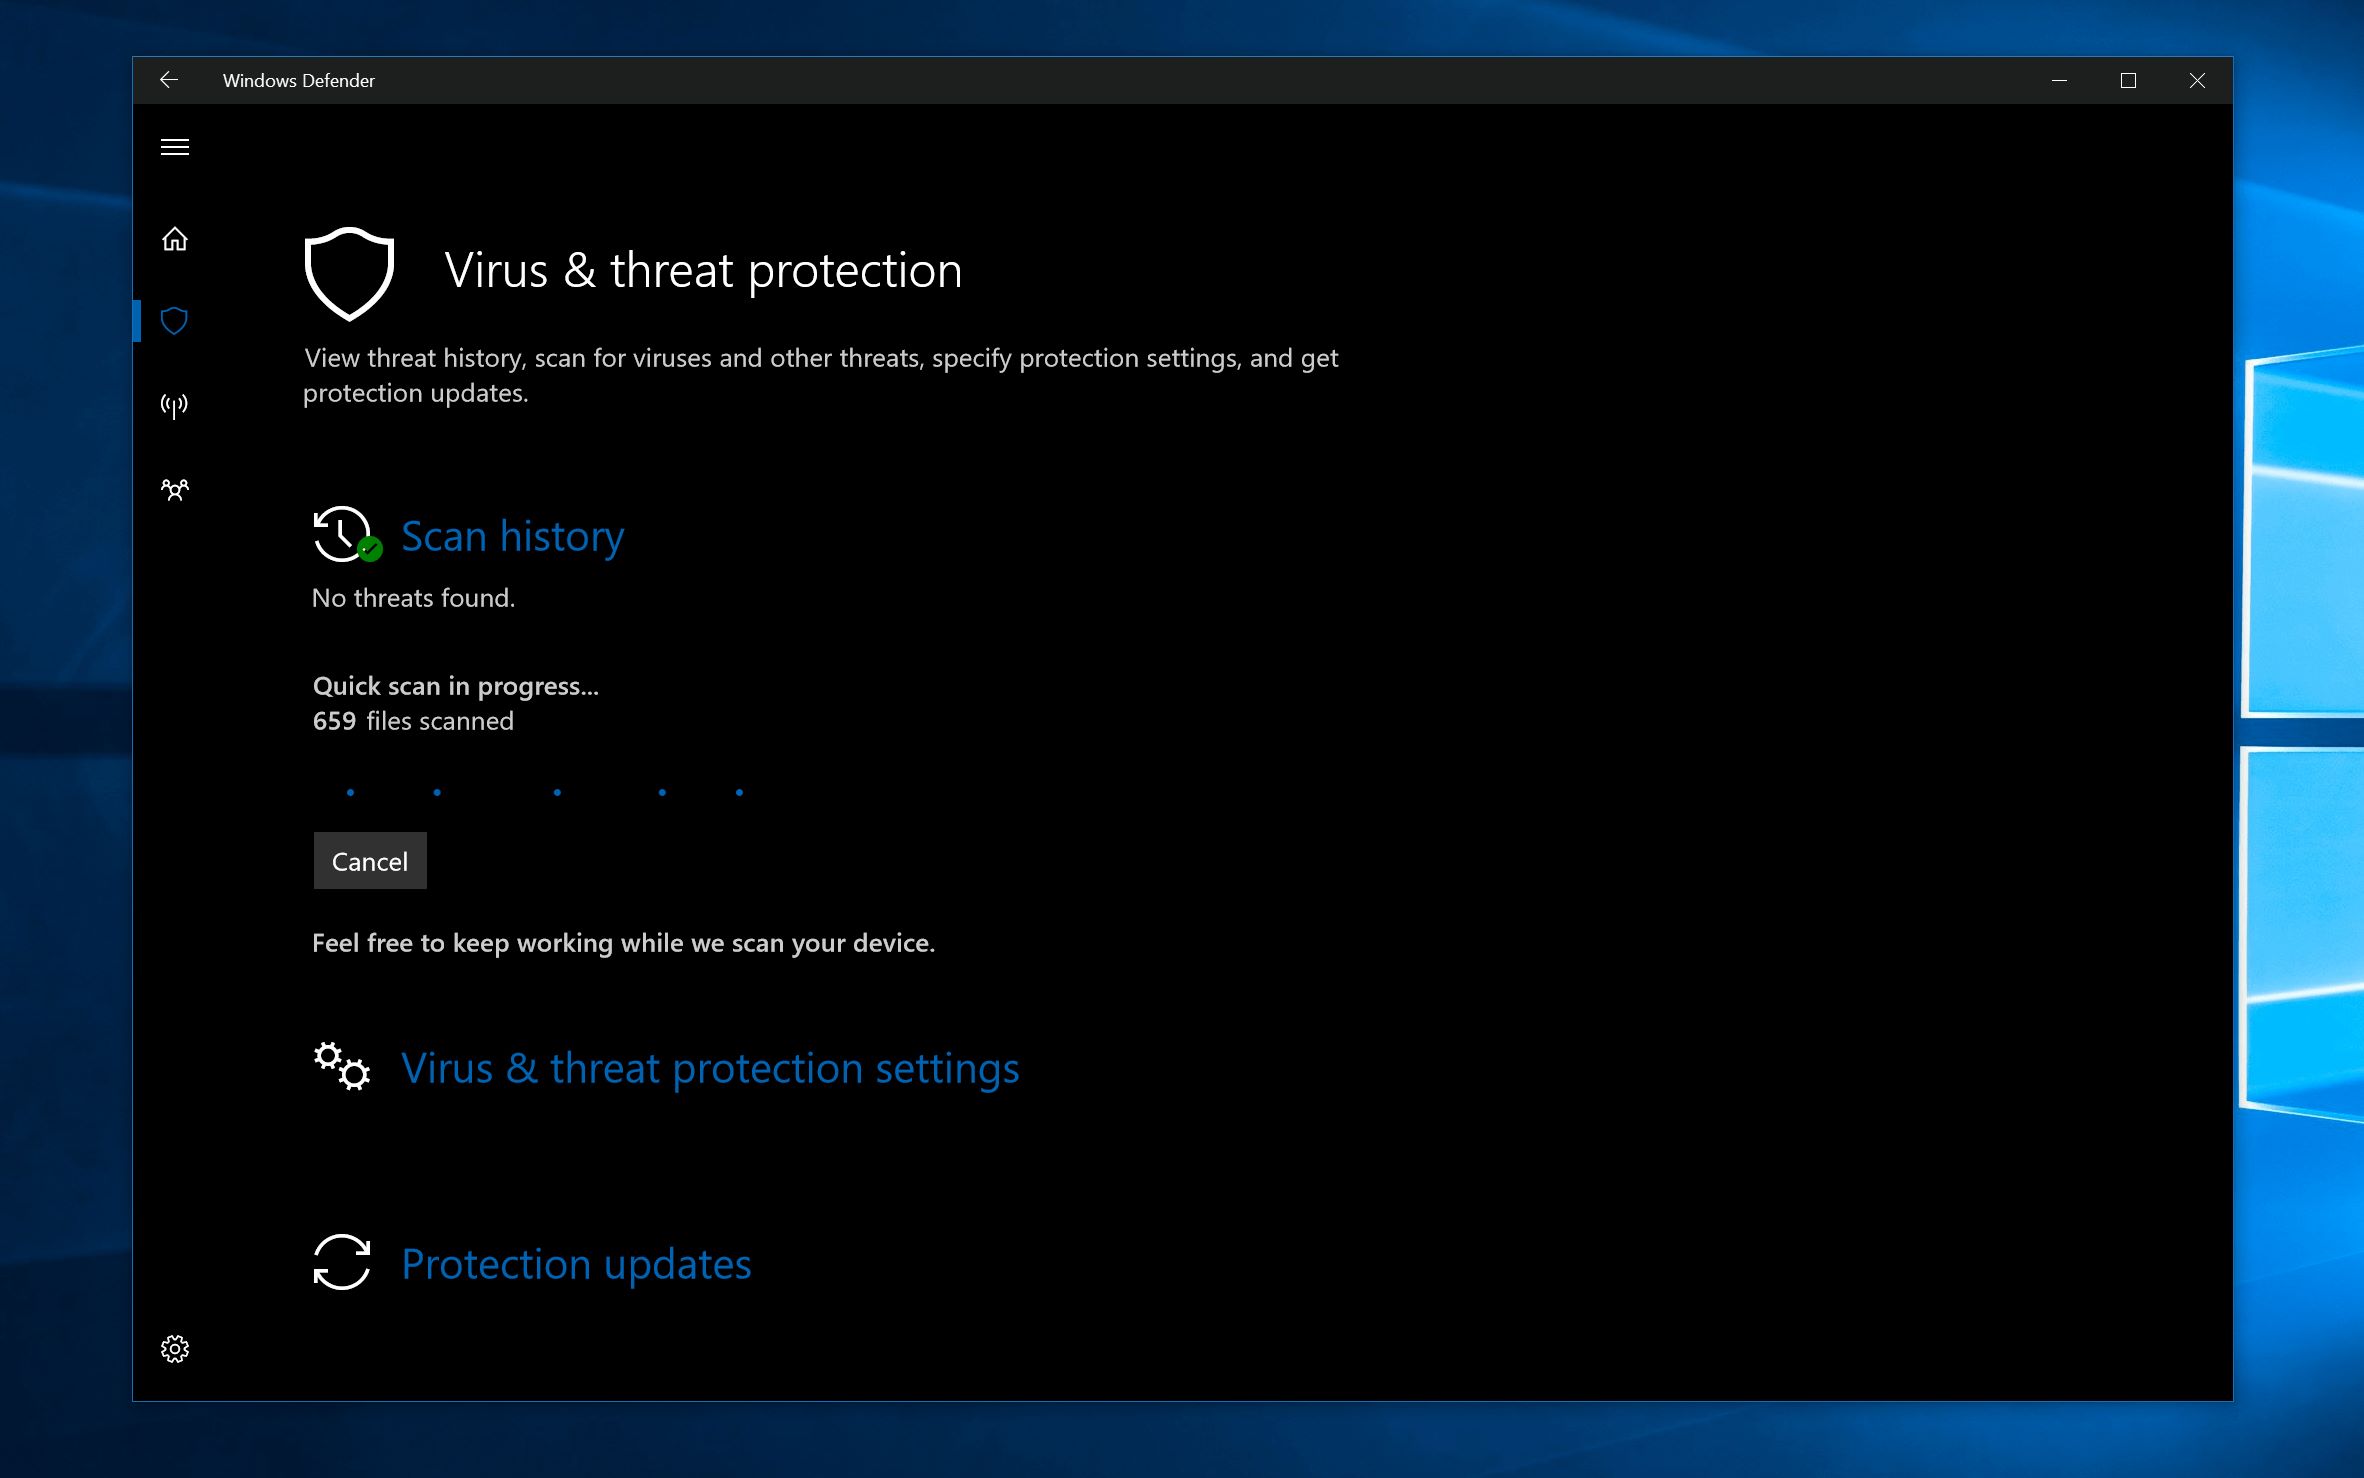 How To Disable Windows Defender On Windows 10